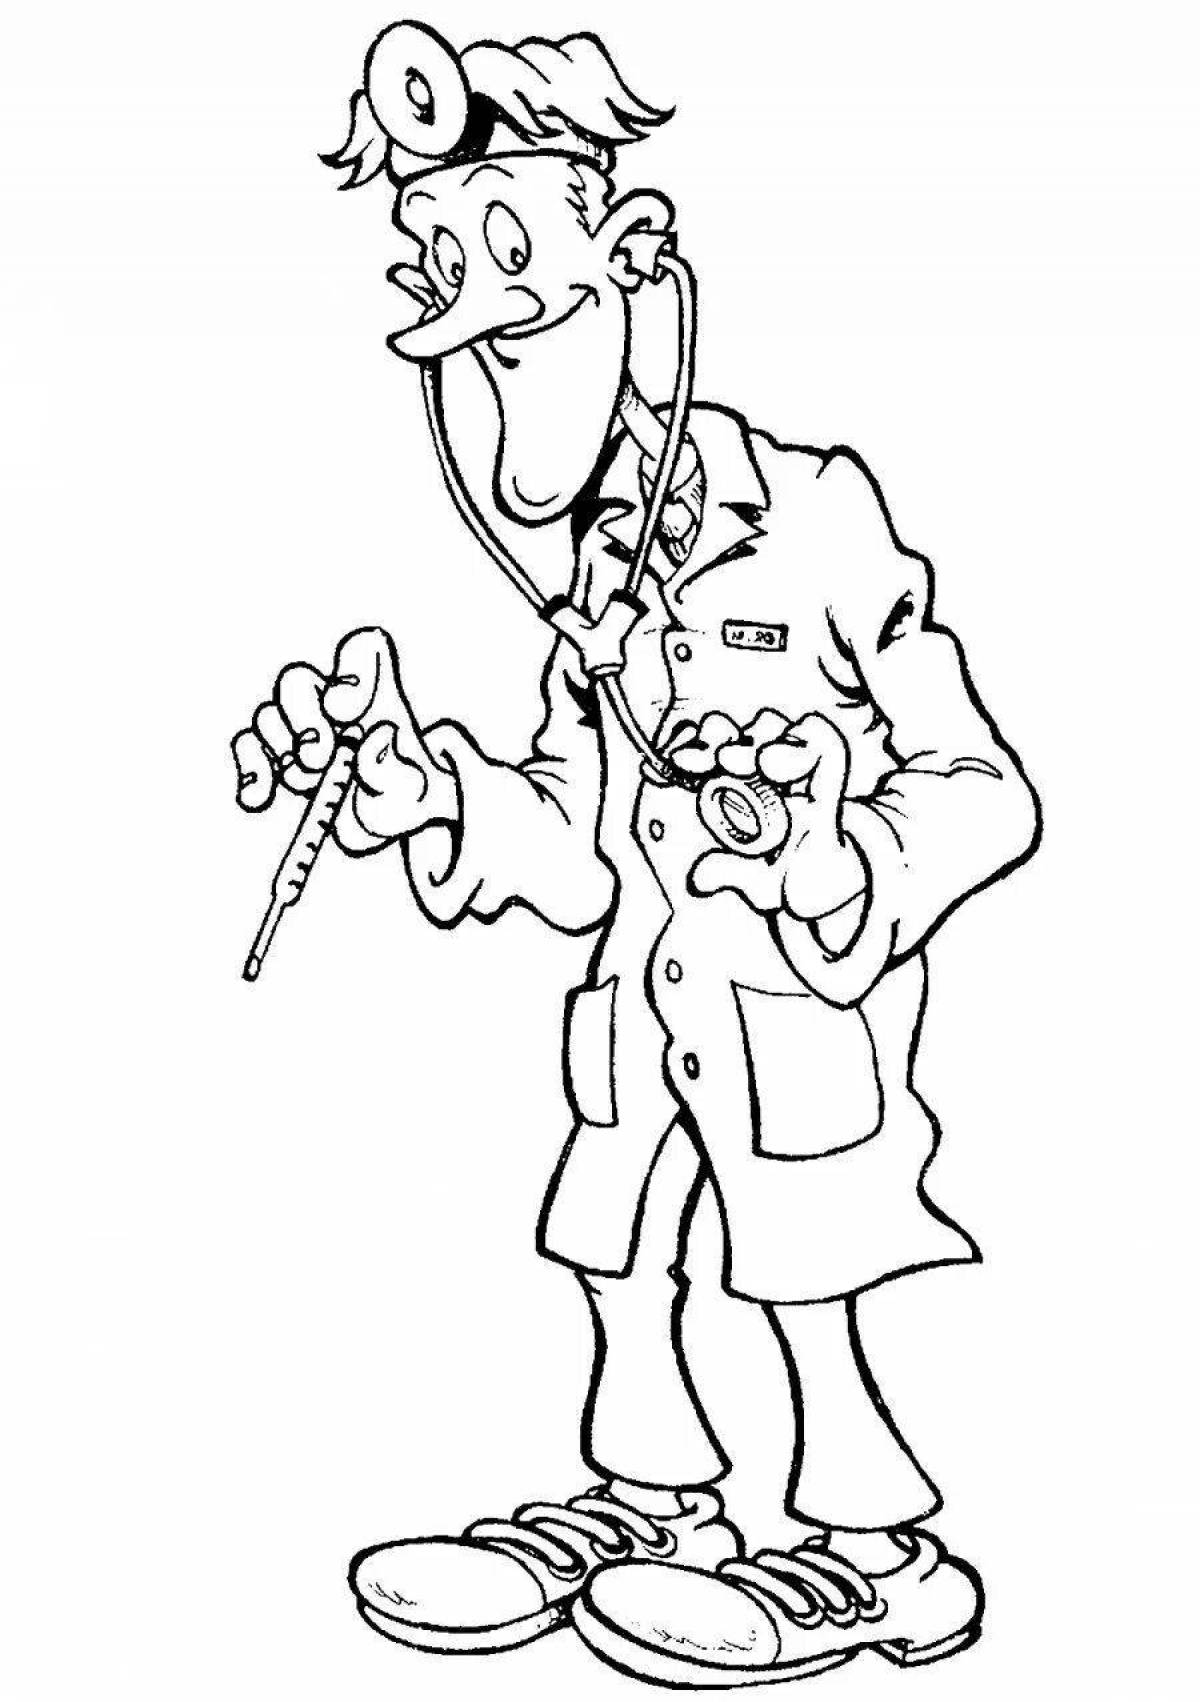 Coloring page happy doctor